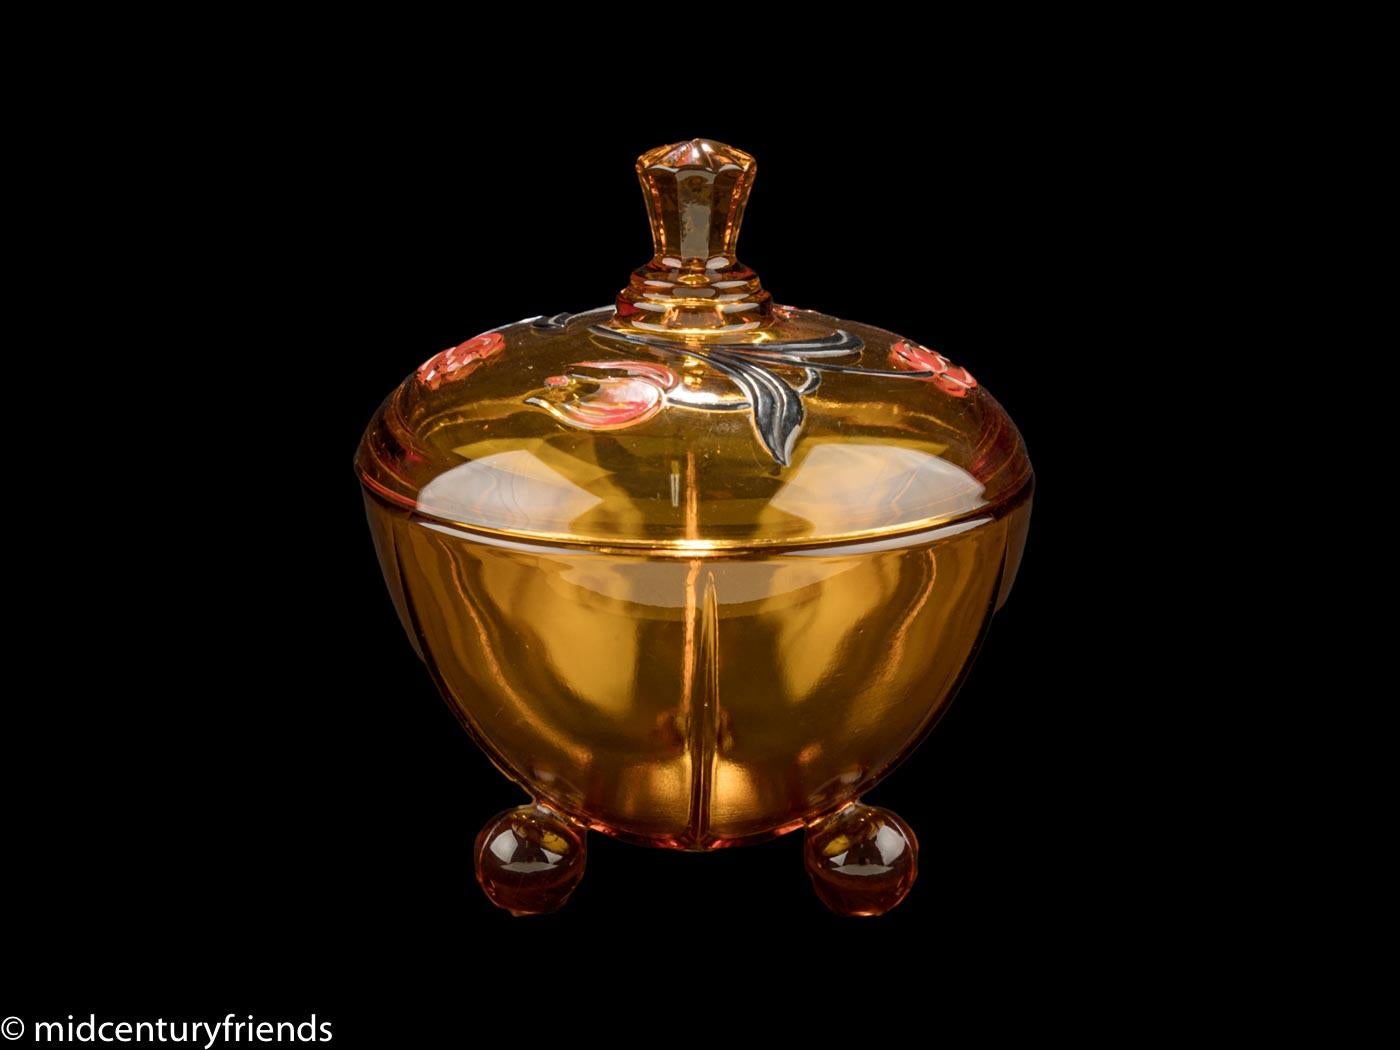 Charming bonbonniére from the 1930s. Well-shaped glass jar in shades of brown with three tulips on the lid. 